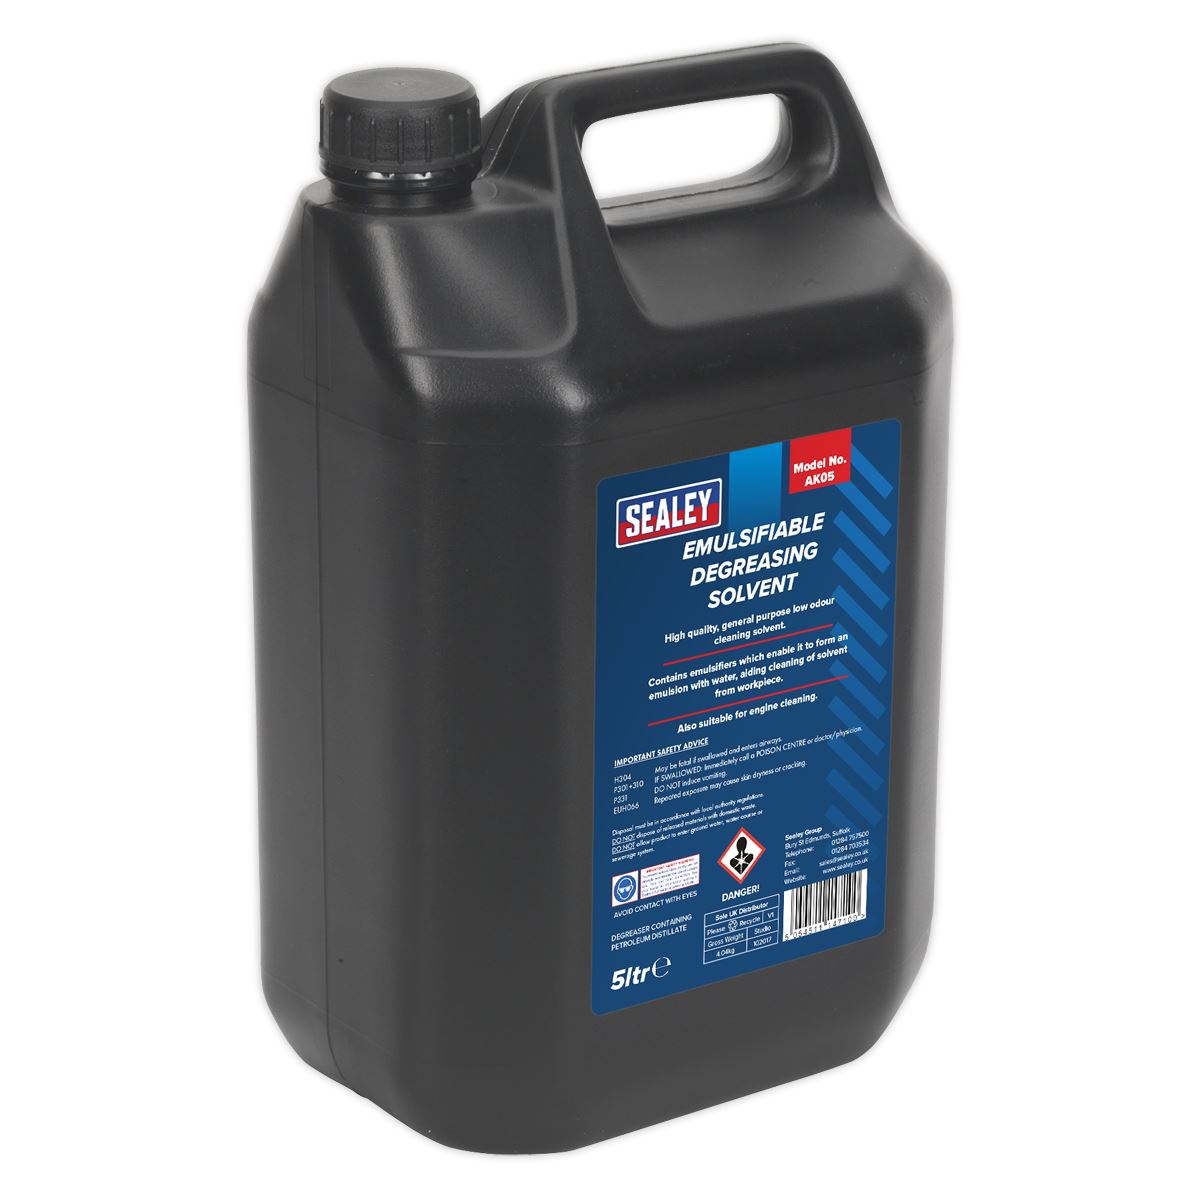 Sealey Degreasing Solvent Emulsifiable 5L